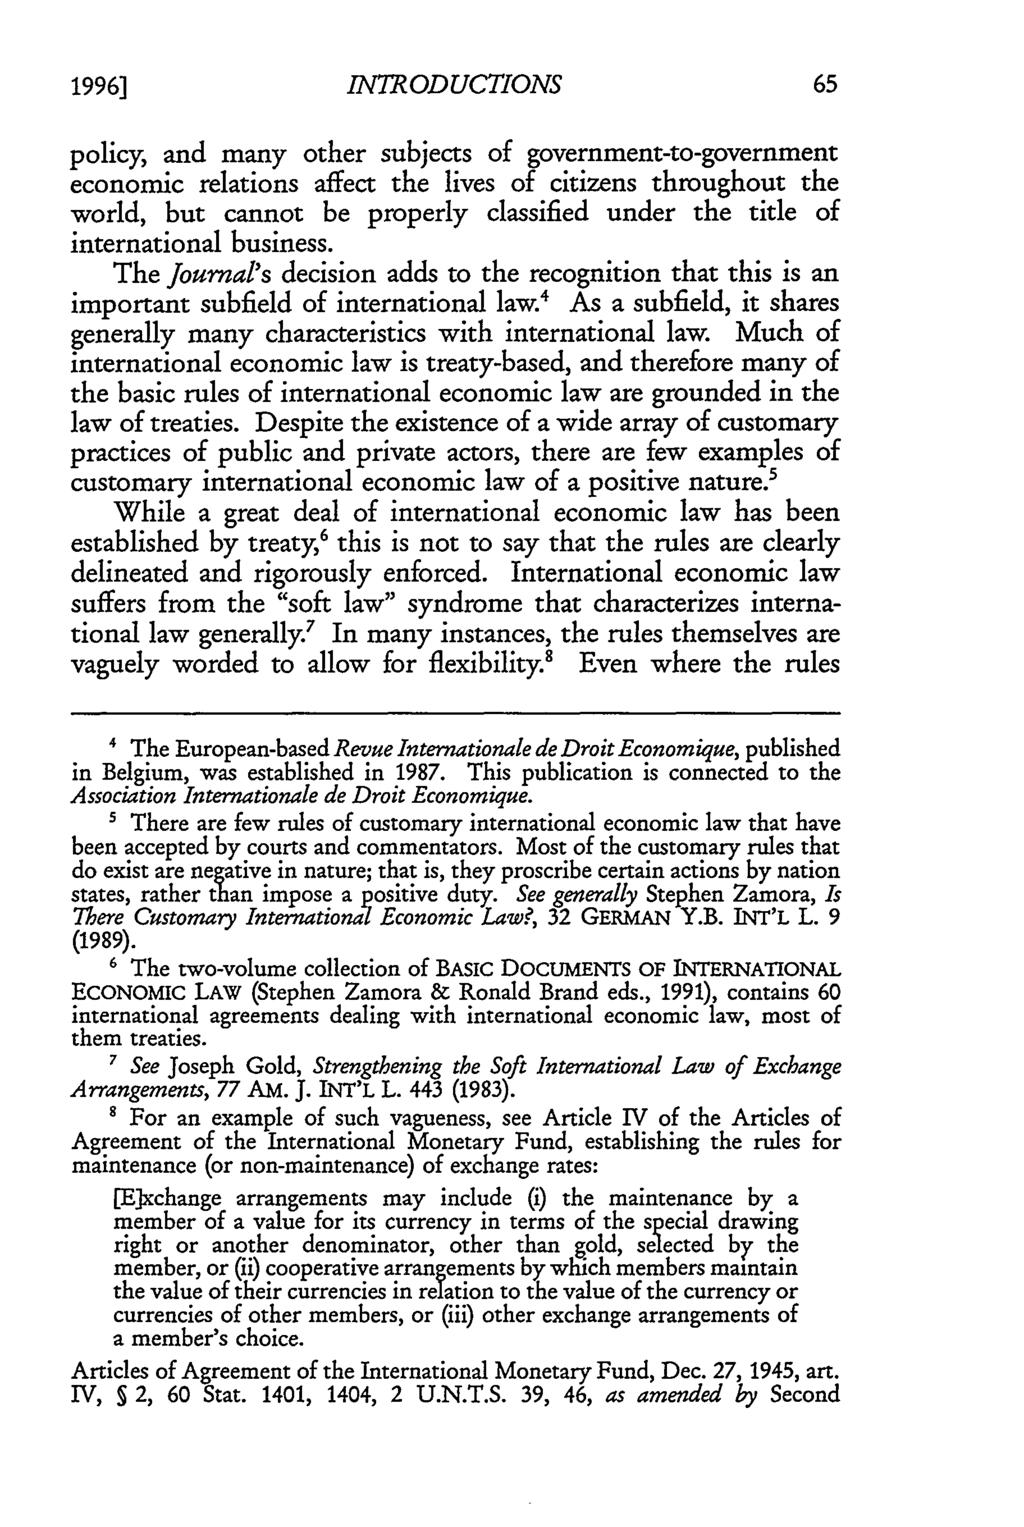 1996] Zamora: International Economic Law INTRODUCTIONS policy, and many other subjects of government-to-government economic relations affect the lives of citizens throughout the world, but cannot be